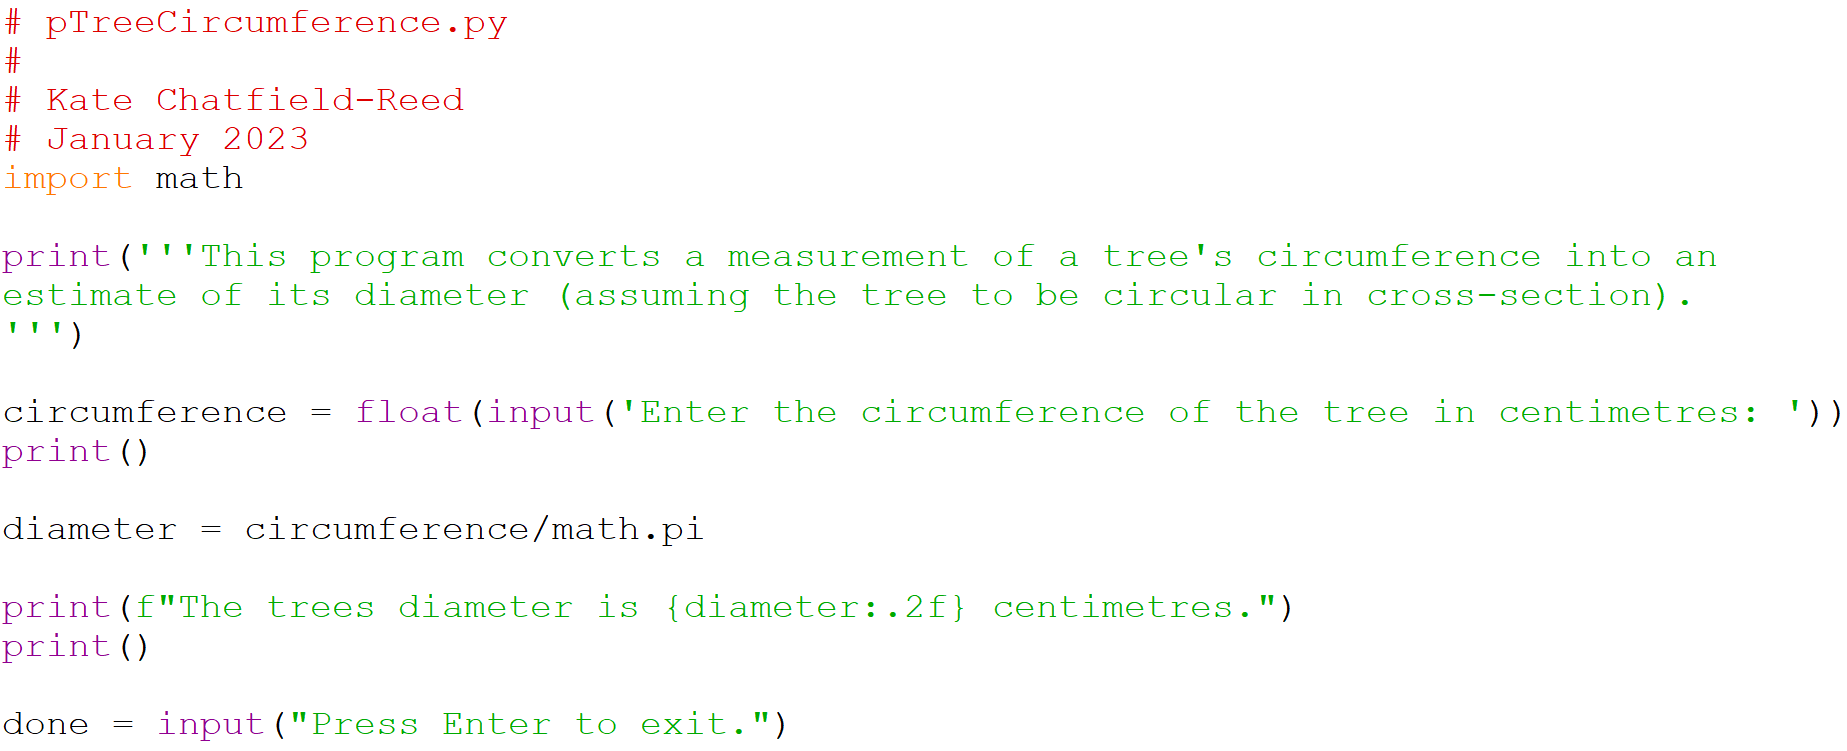 Python code to calculate the diameter of a tree from the
circumference.